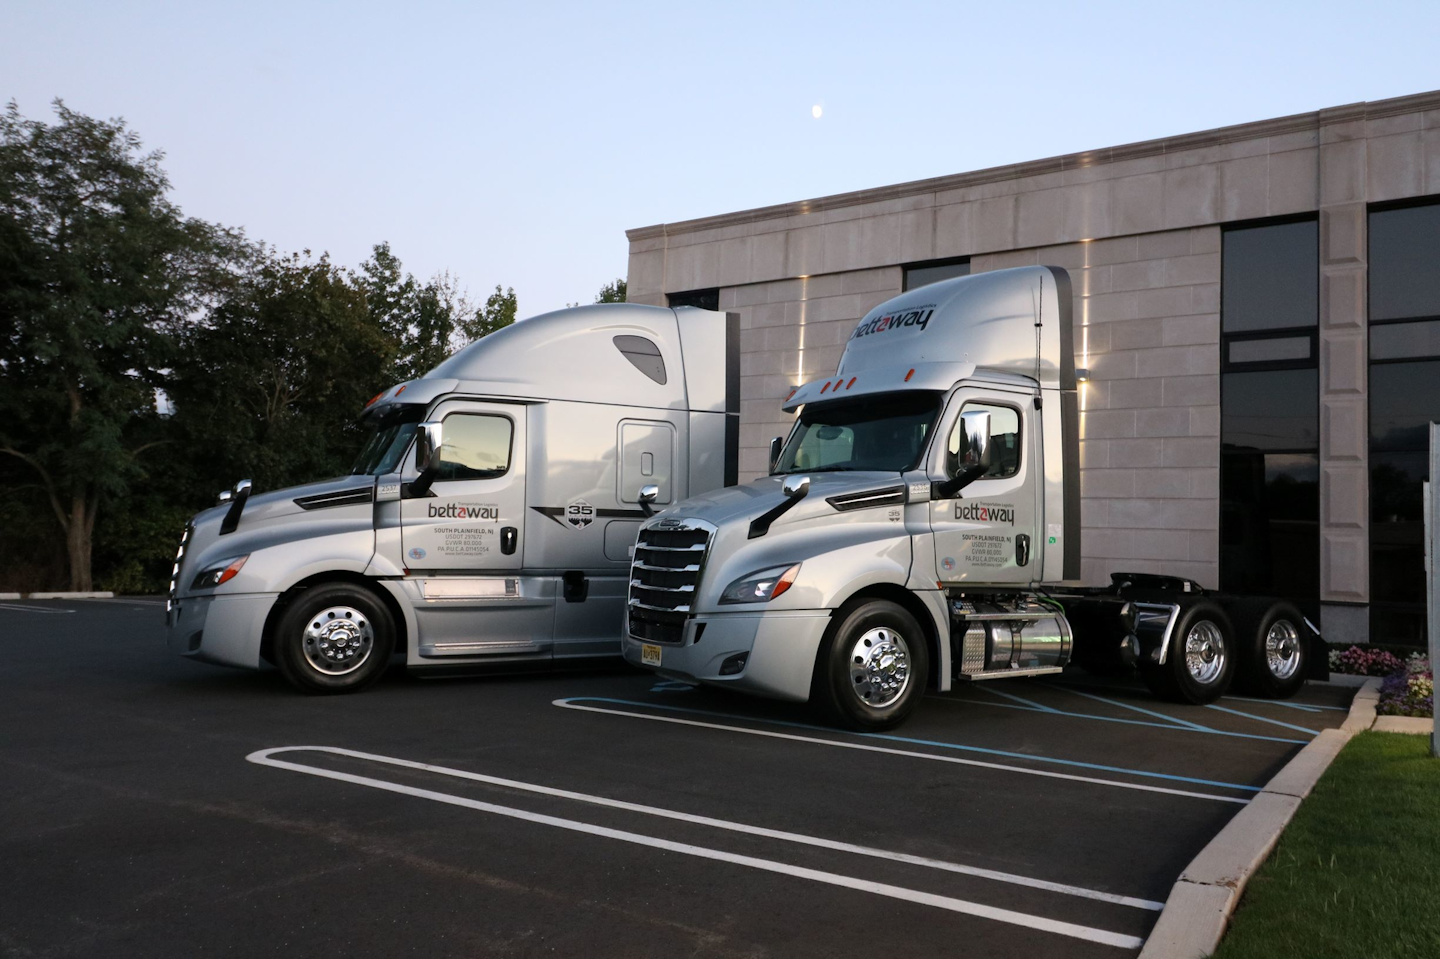 Bettaway's fleet of 150 Freightliner Cascadias are equipped with collision avoidance to prevent crashes, and dash cams to understand how crashes happened.